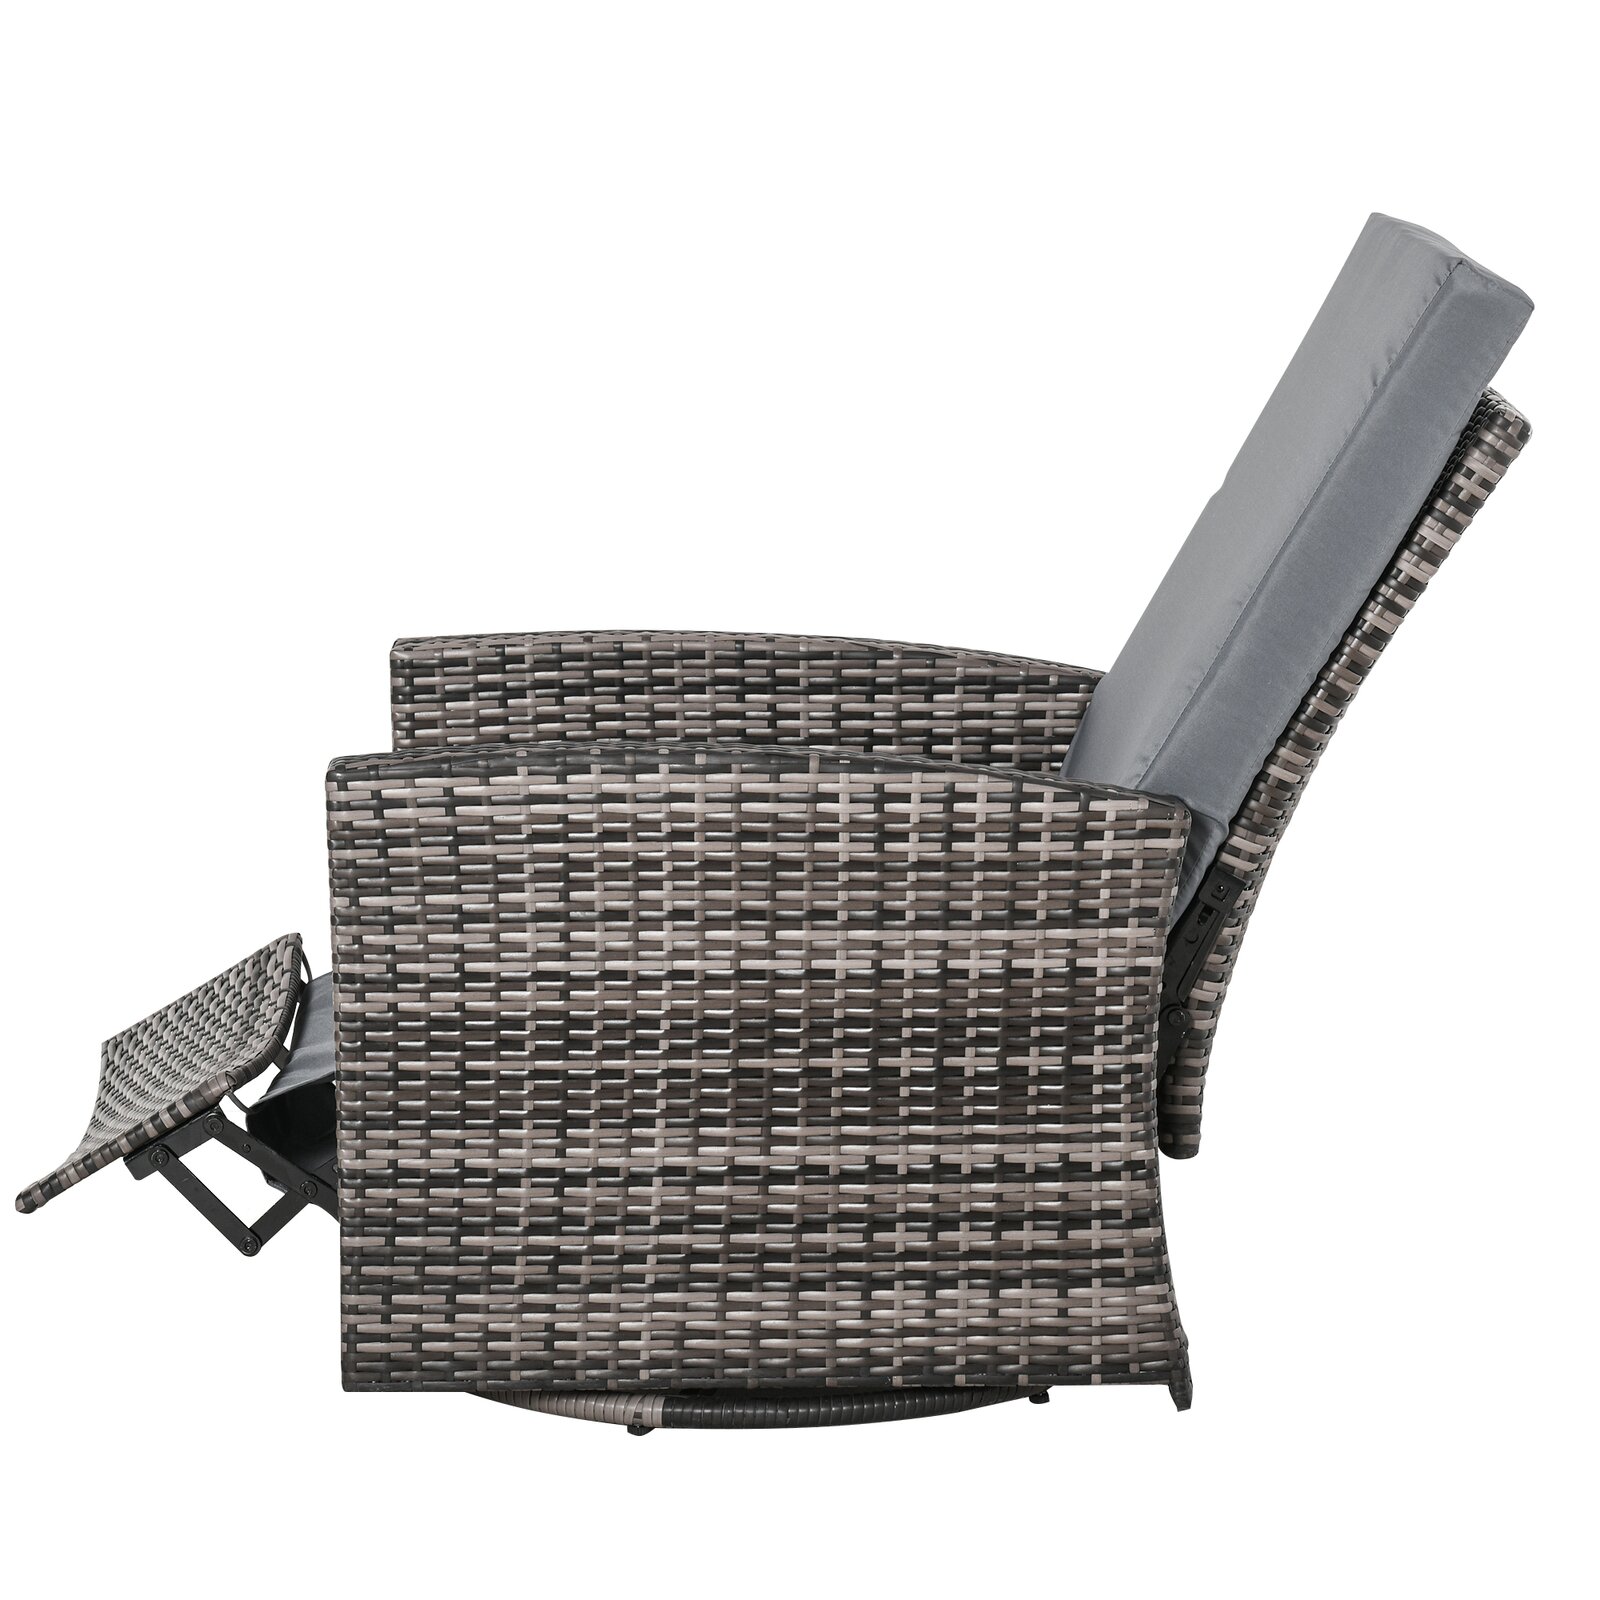 Harrill Swivel Recliner Patio Chair with Cushions, Reclining: Yes, Outer Frame Material: Wicker/Rattan - image 3 of 5